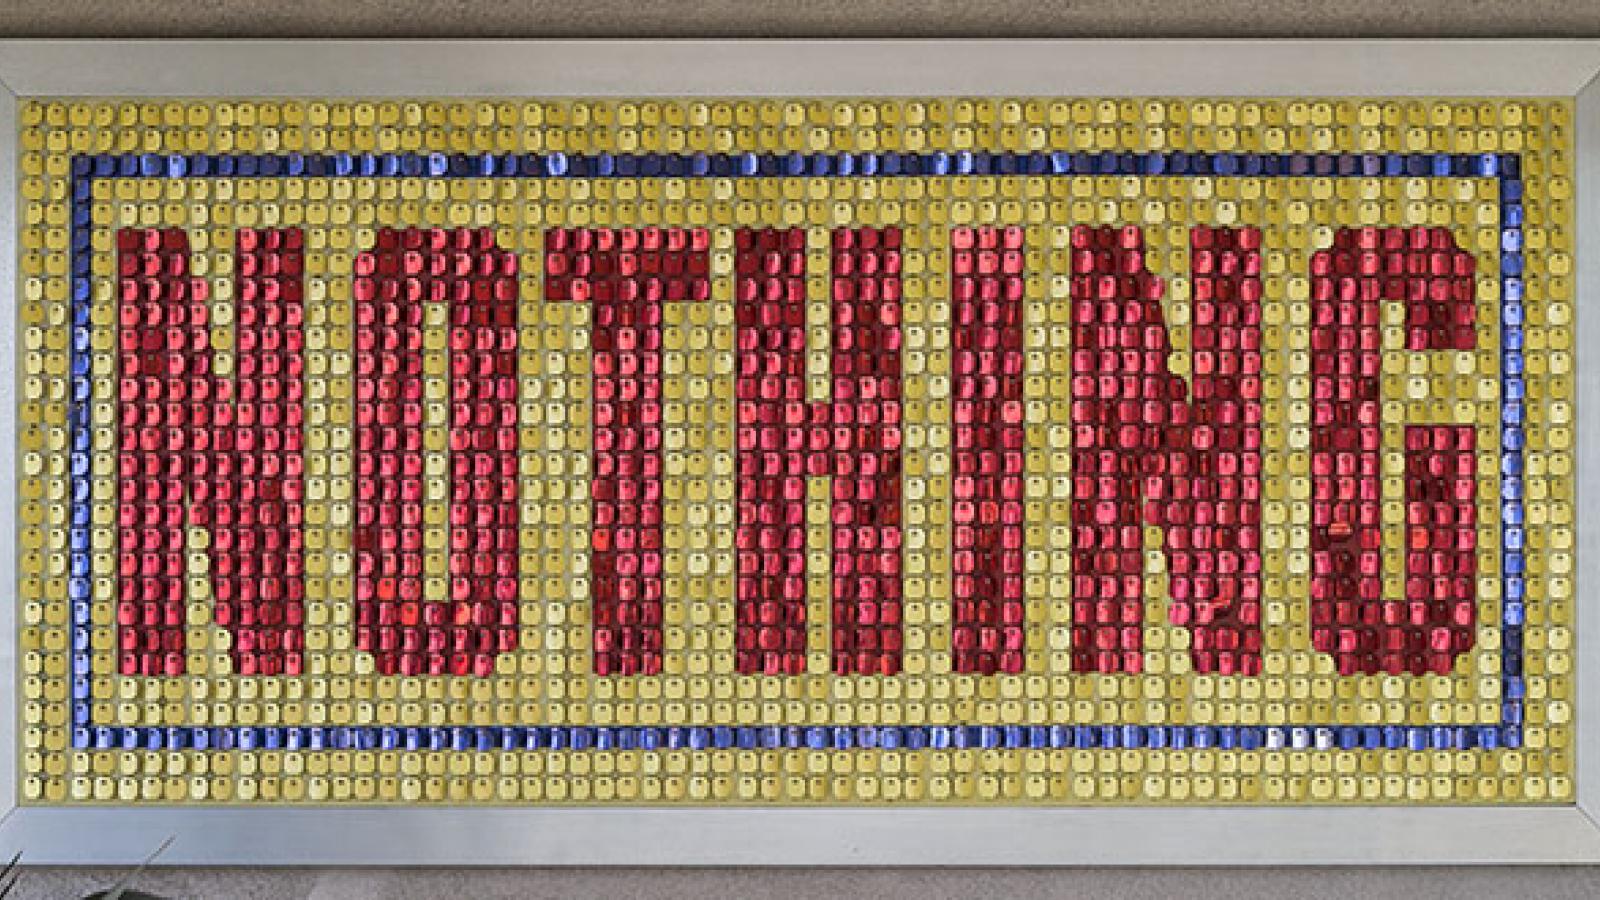 Jack Pierson, Nothing (Yellow, Blue, Red), 1992, mixed media, 54 x 112 x 1 inches (137.2 x 284.5 x 2.5 cm) Collection of Blake Byrne. Image Copy-write Jack Pierson; courtesy of Regen Projects, Los Angeles; Photo by Alan Shaffer.